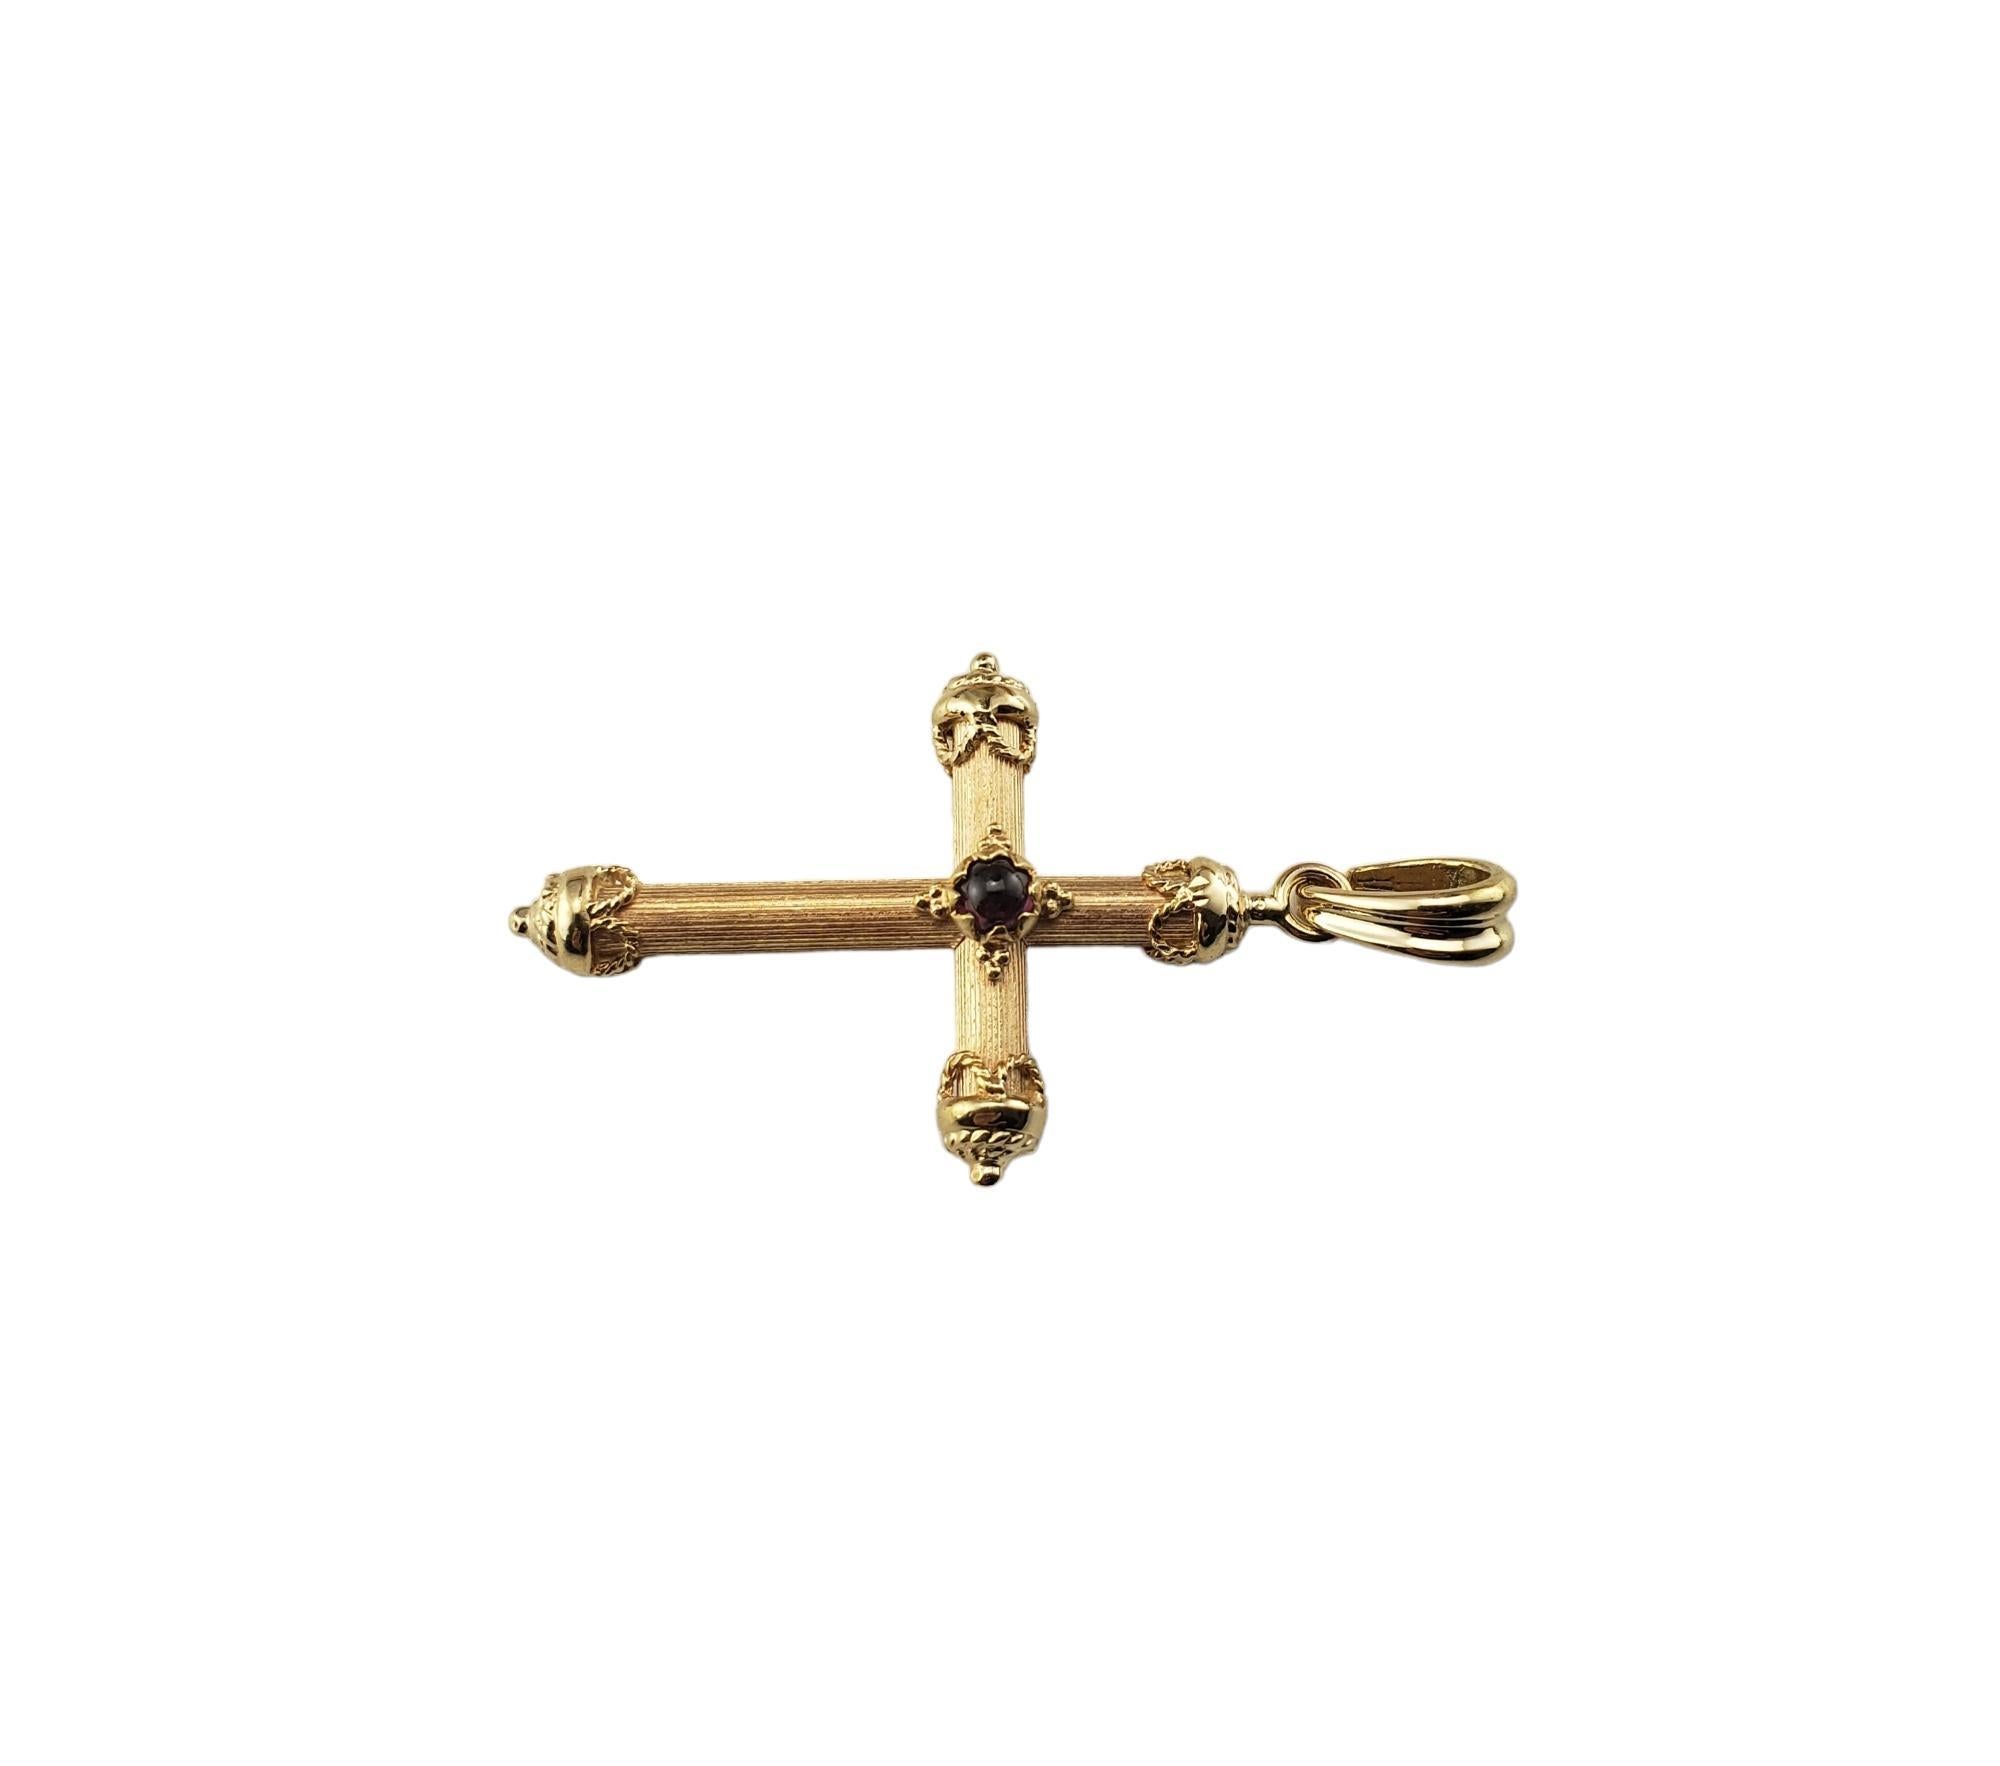 Vintage 14 Karat Yellow Gold Cross Pendant-

This lovely cross pendant is crafted in beautifully detailed 14K yellow gold.  Accented with one round cabochon purple stone.

Size:  34.6 mm x 22.7 mm

Stamped: 585

Weight: 3.2 gr./ 2.0 dwt.

*Chain not